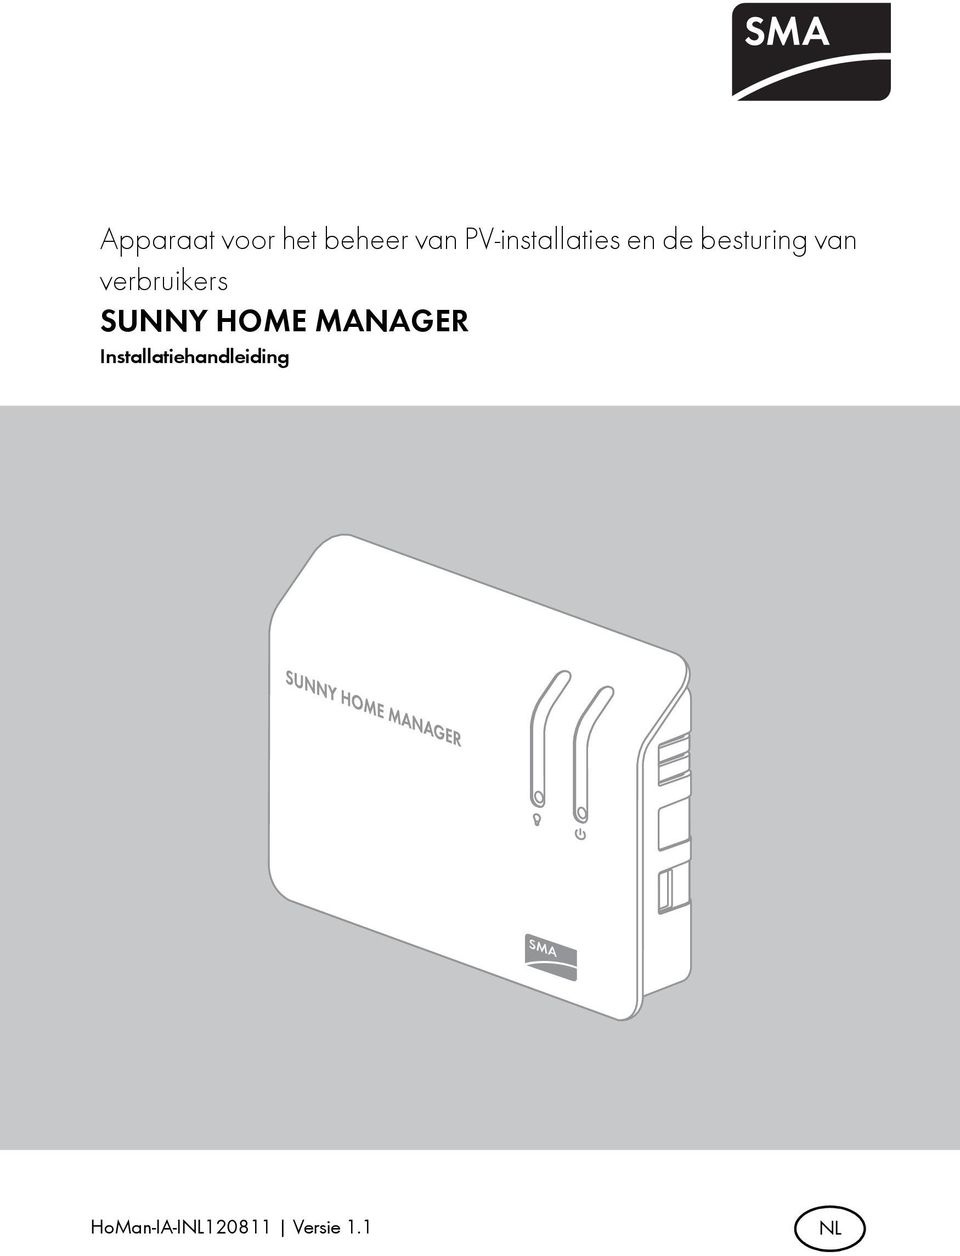 verbruikers SUNNY HOME MANAGER